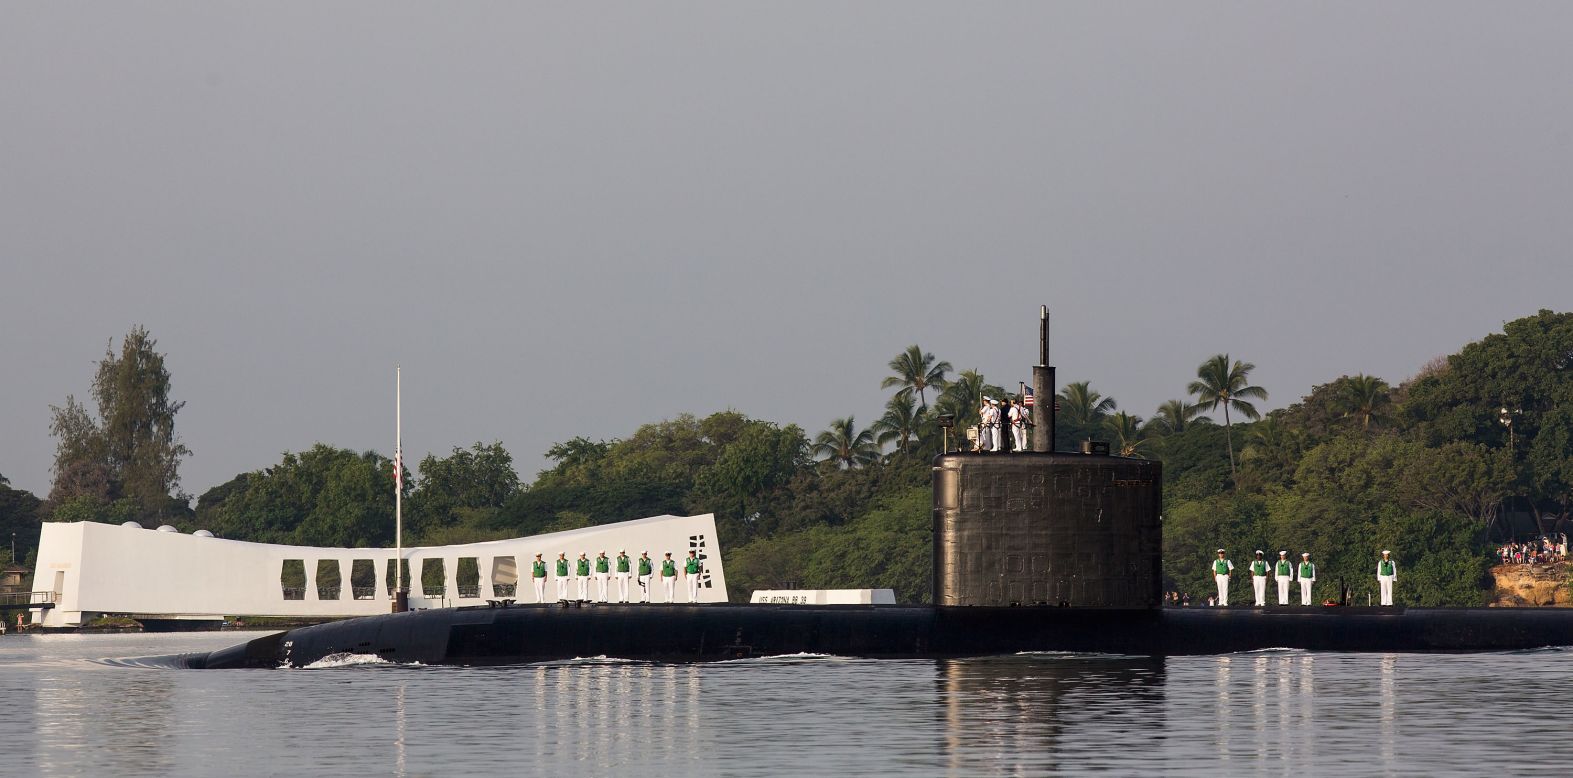 The USS Tucson performs a pass in review near the USS Arizona Memorial in Pearl Harbor, Hawaii.